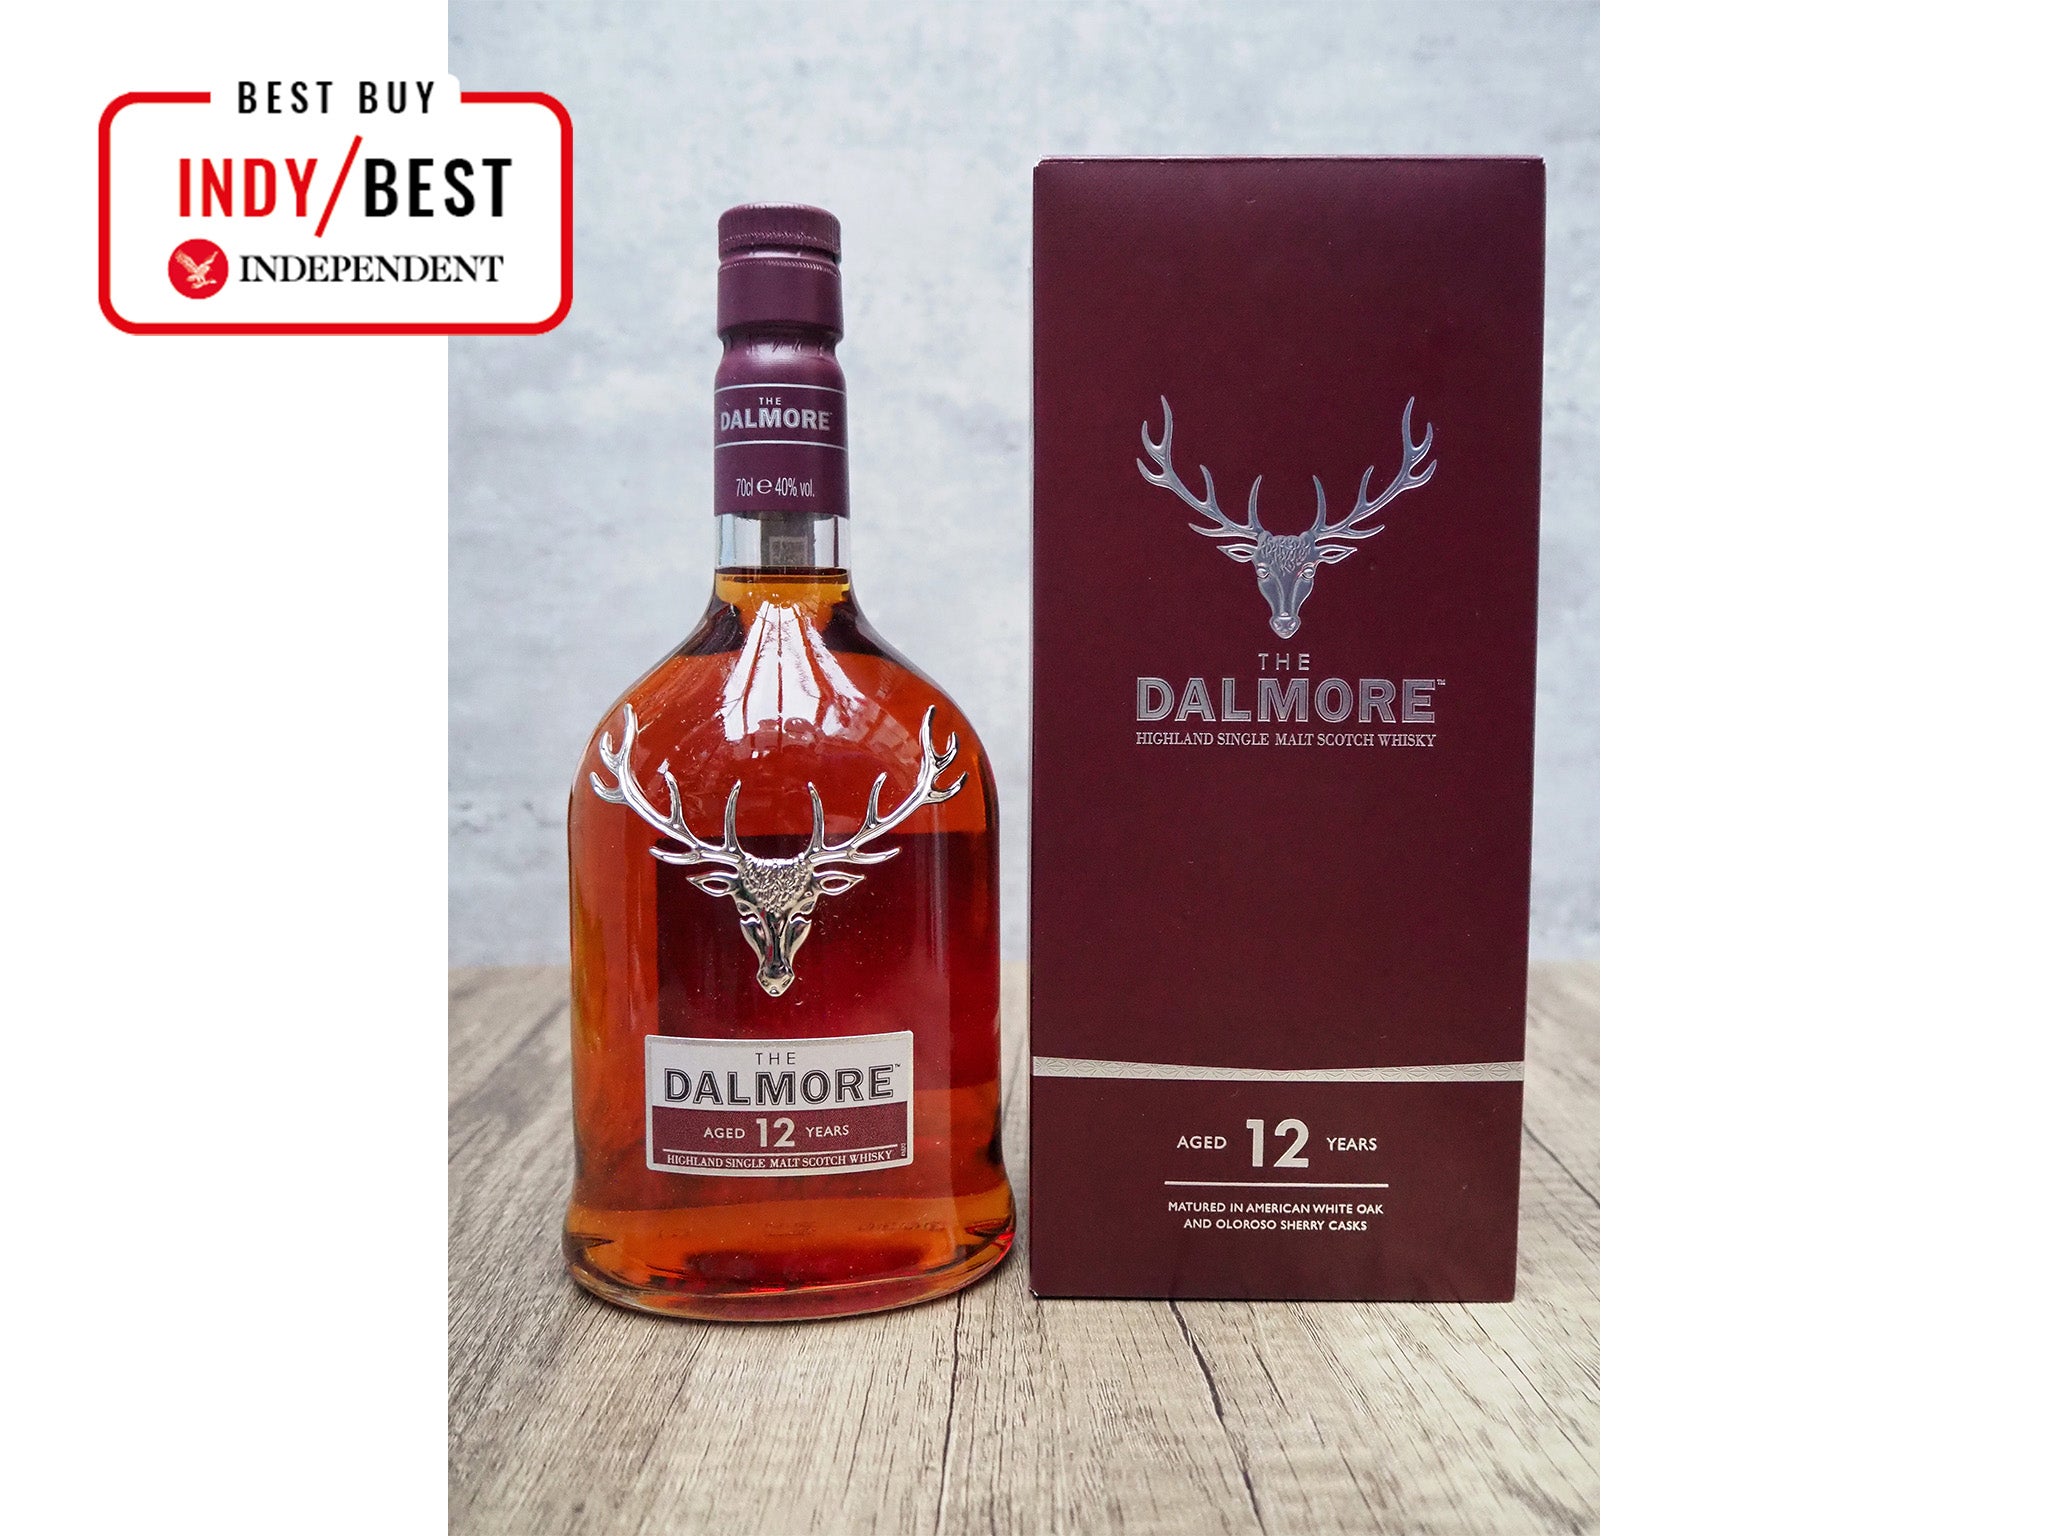 The Dalmore 12 year old